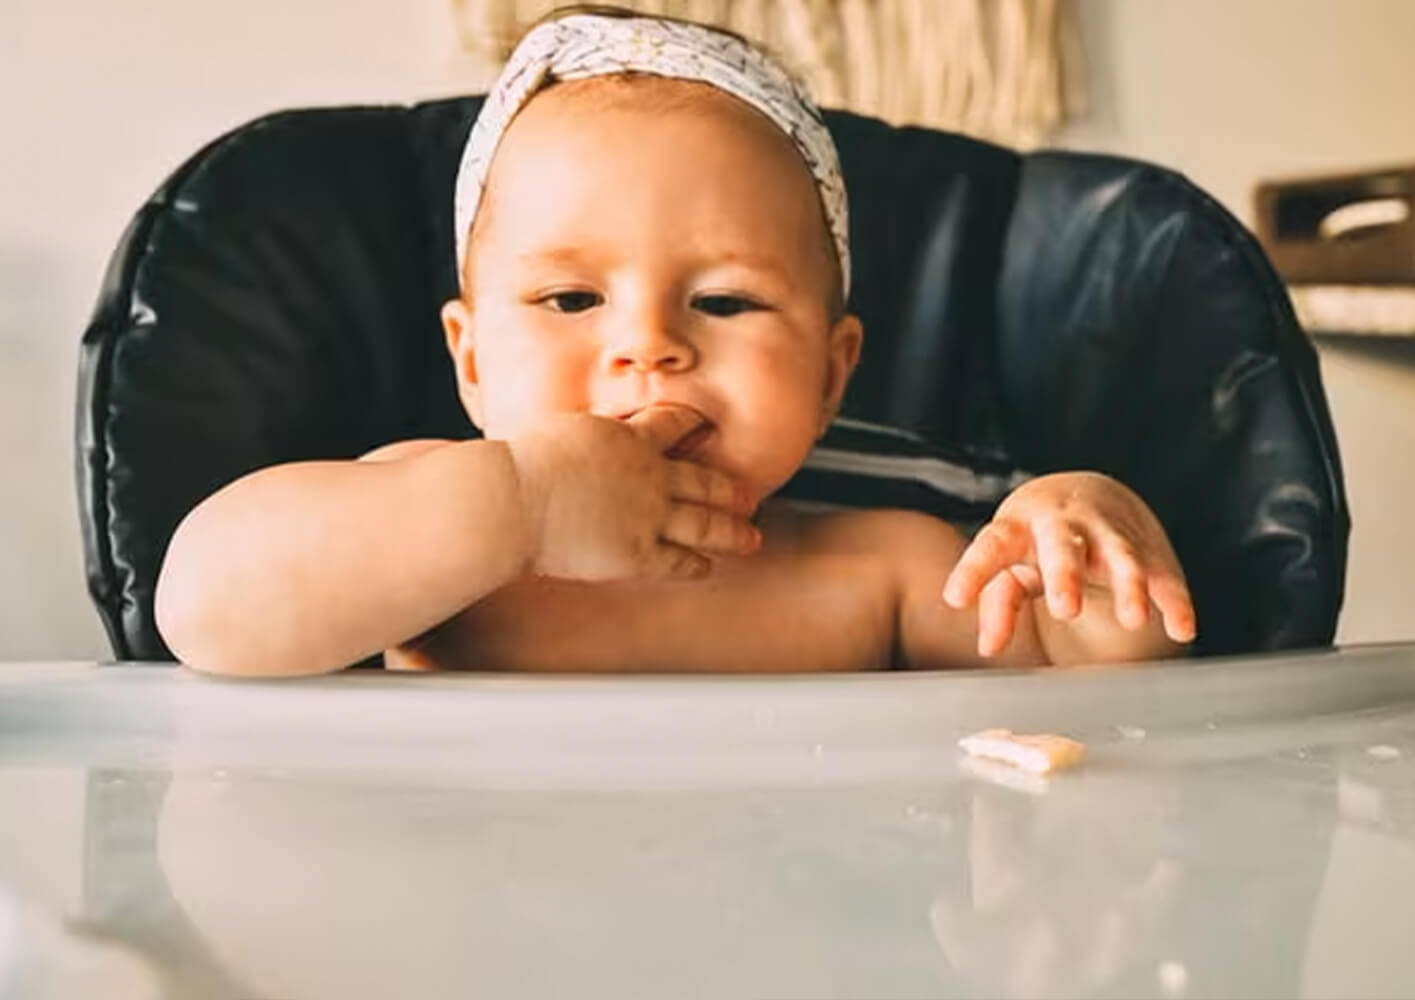 10 starter weaning foods to try with your baby